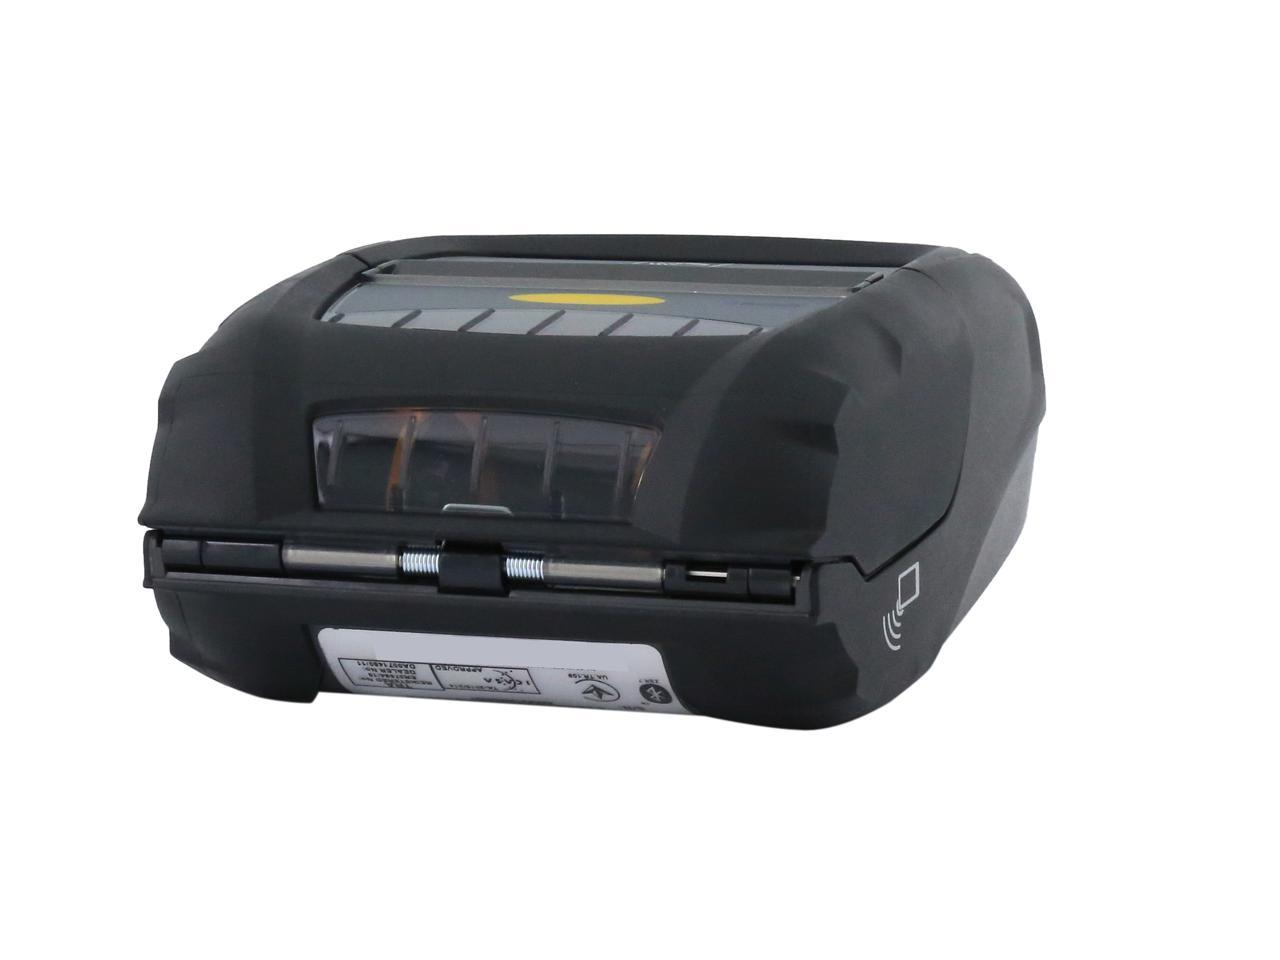 Zebra Zq510 3 Mobile Direct Thermal Receipt And Label Printer 203 Dpi Bluetooth 40 Linered 0850